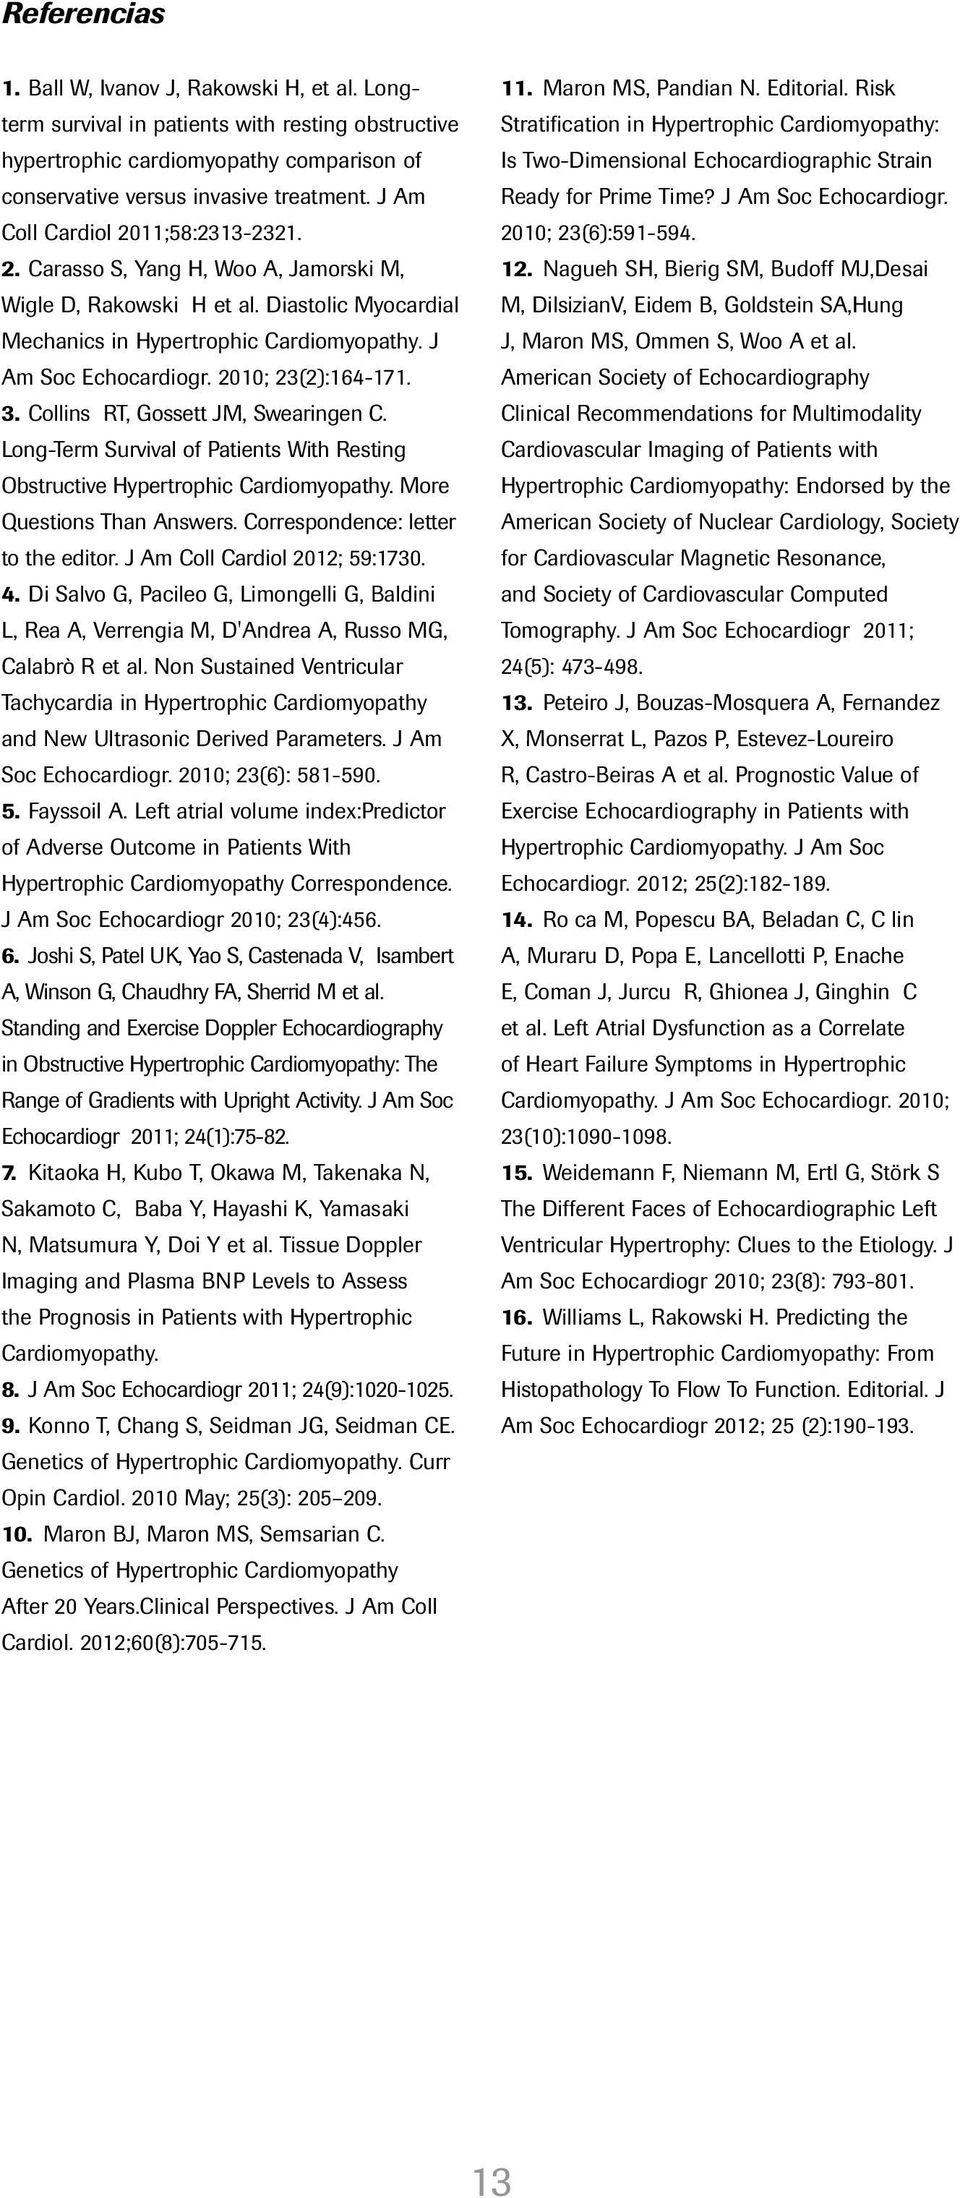 2010; 23(2):164-171. 3. Collins RT, Gossett JM, Swearingen C. Long-Term Survival of Patients With Resting Obstructive Hypertrophic Cardiomyopathy. More Questions Than Answers.